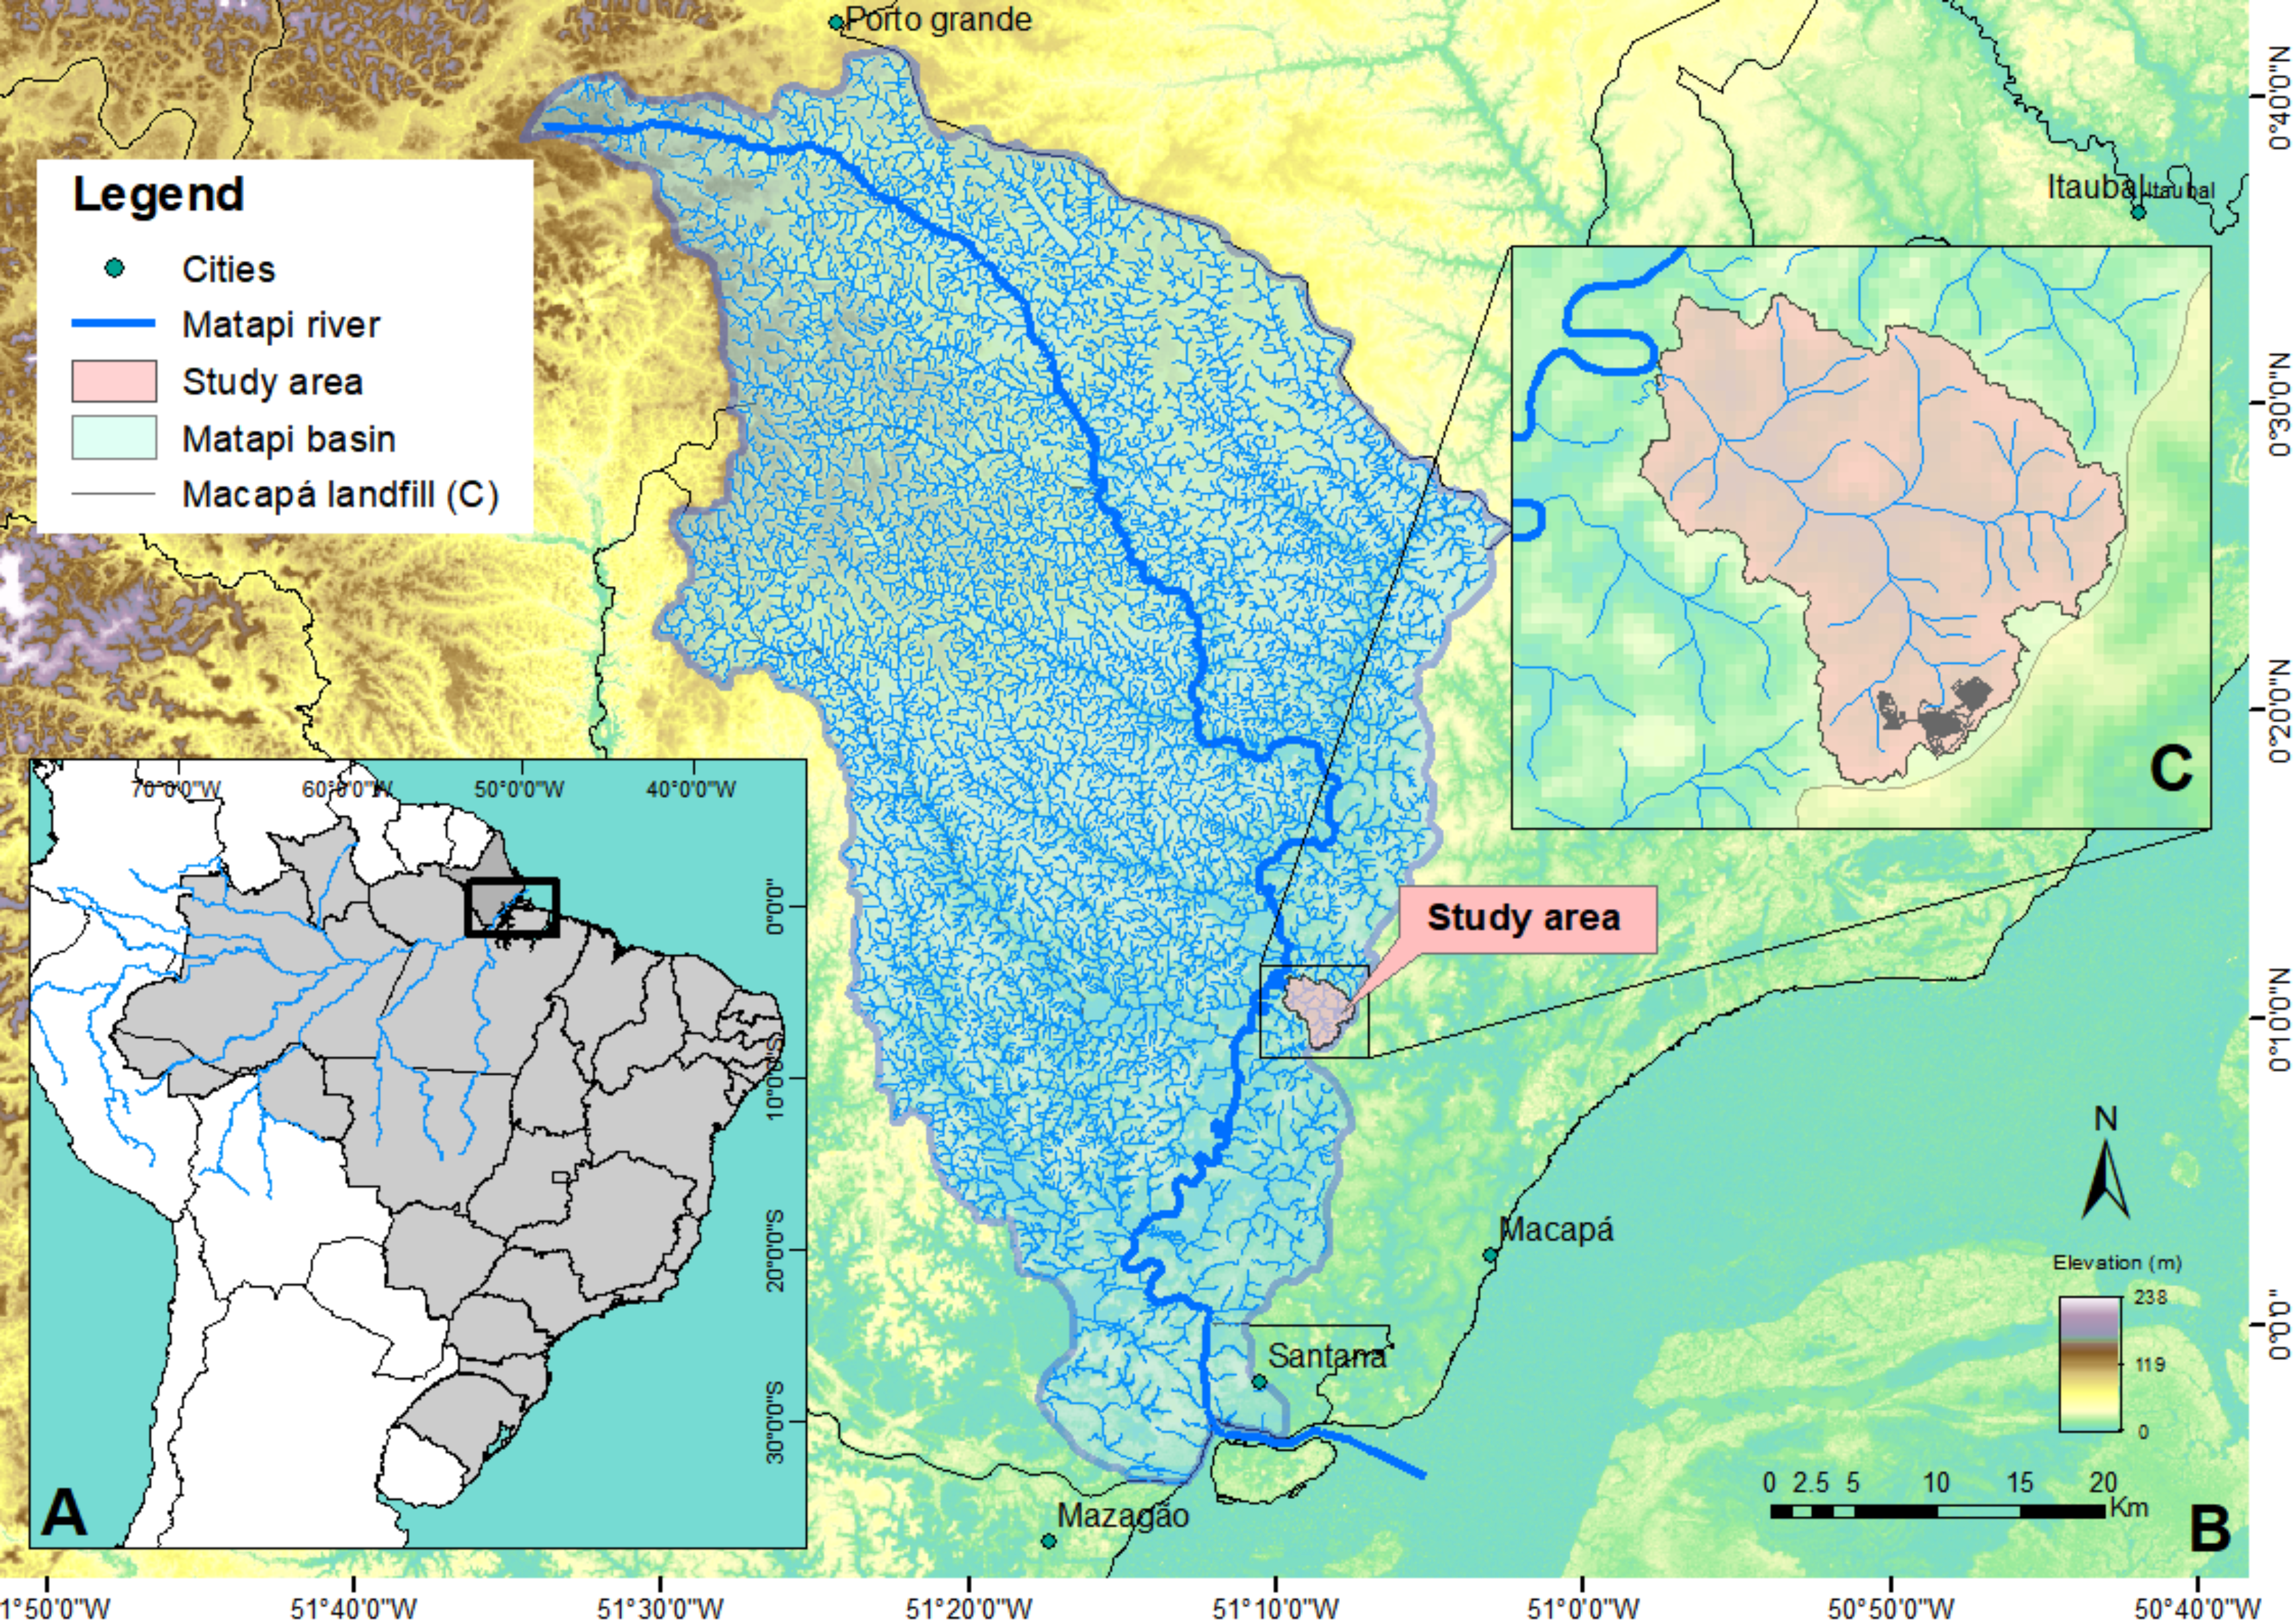 Water Treatment Brazil: Over 668 Royalty-Free Licensable Stock